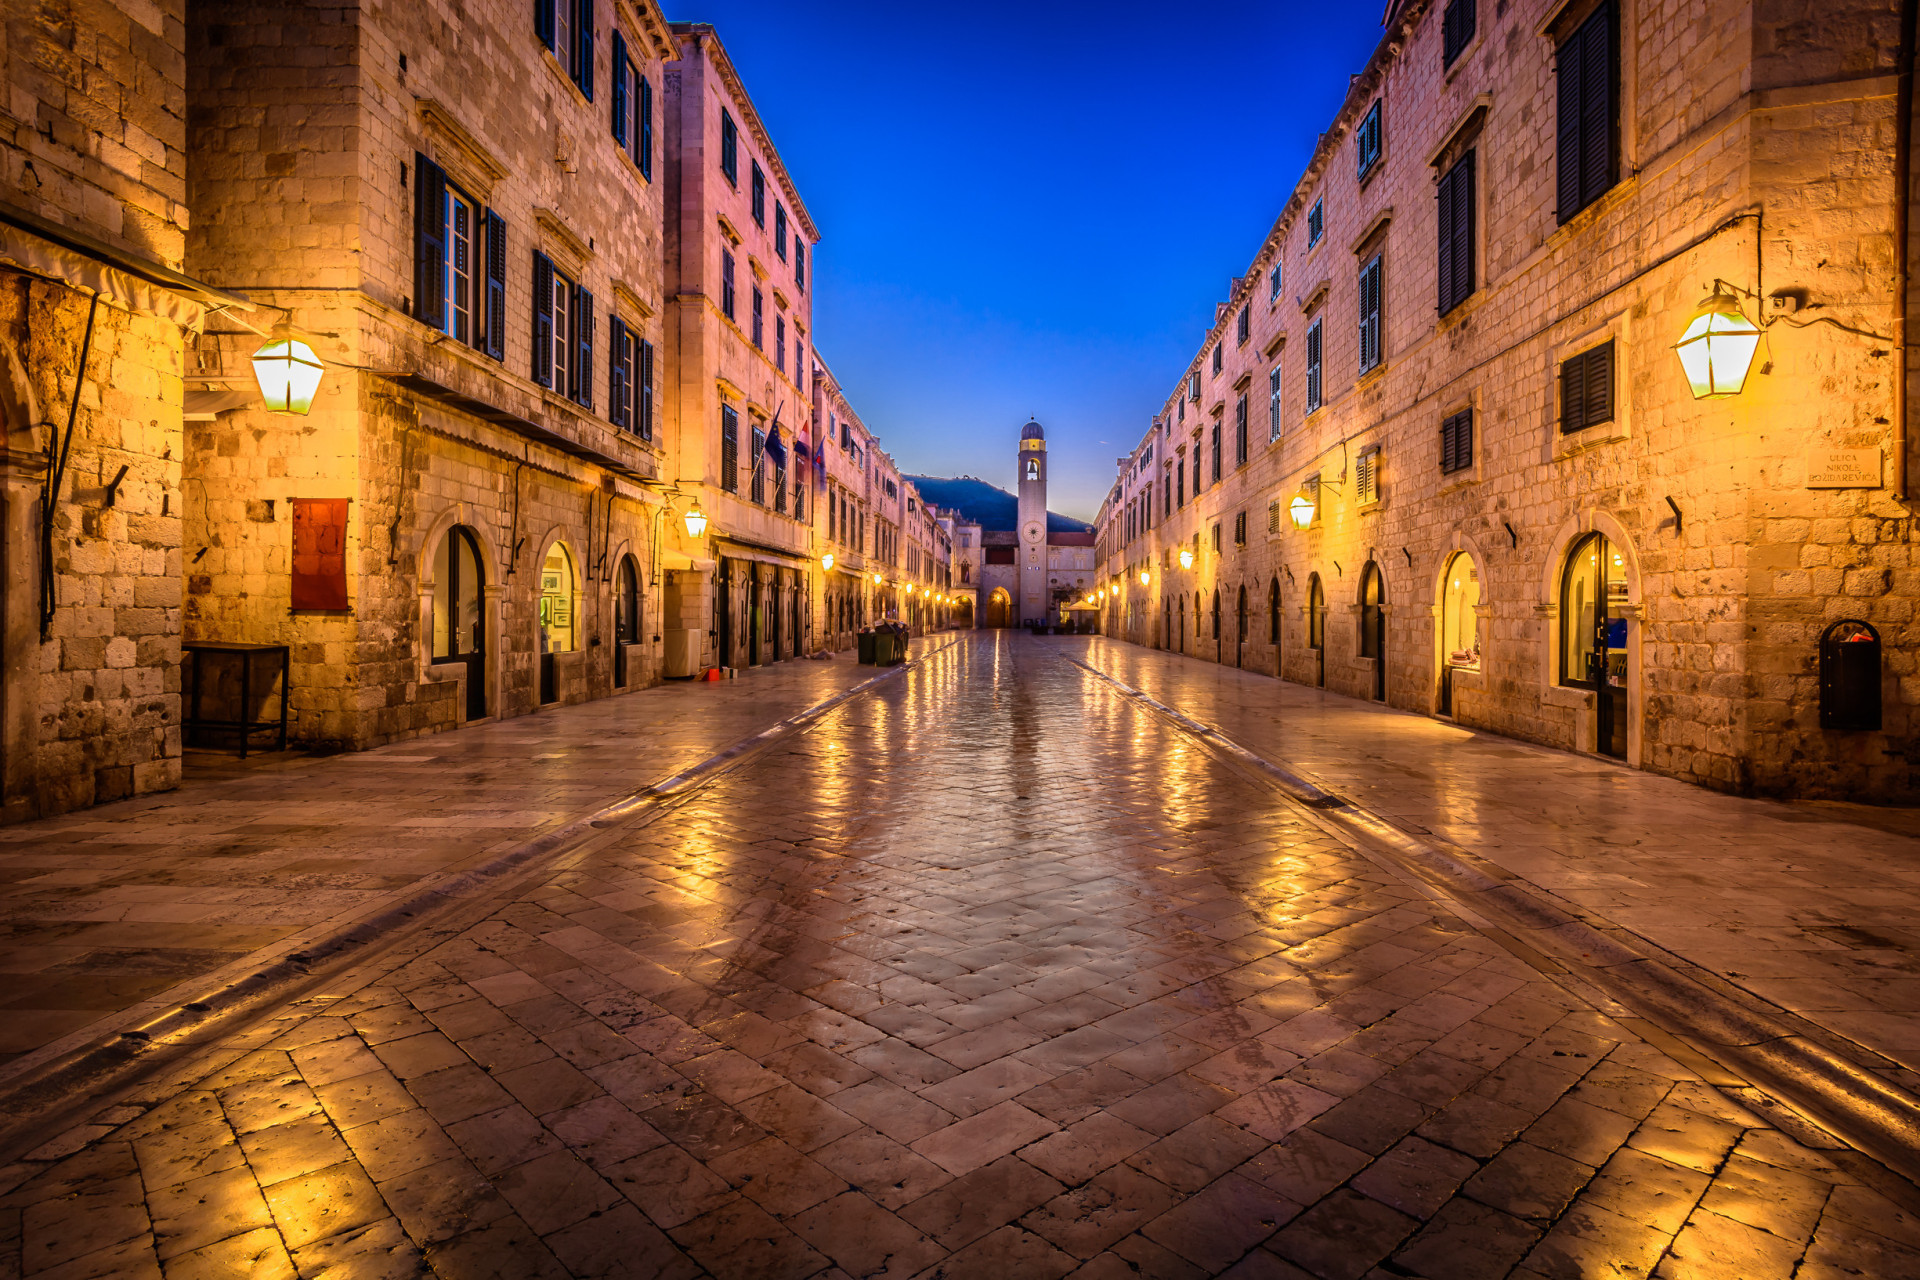 Dubrovnik's old town has held onto its medieval architecture and walls. The main street is Stradun, one of the most charming streets you will ever see, and it leads to various important parts of Dubrovnik.<p><a href="https://www.msn.com/en-sg/community/channel/vid-7xx8mnucu55yw63we9va2gwr7uihbxwc68fxqp25x6tg4ftibpra?cvid=94631541bc0f4f89bfd59158d696ad7e">Follow us and access great exclusive content every day</a></p>